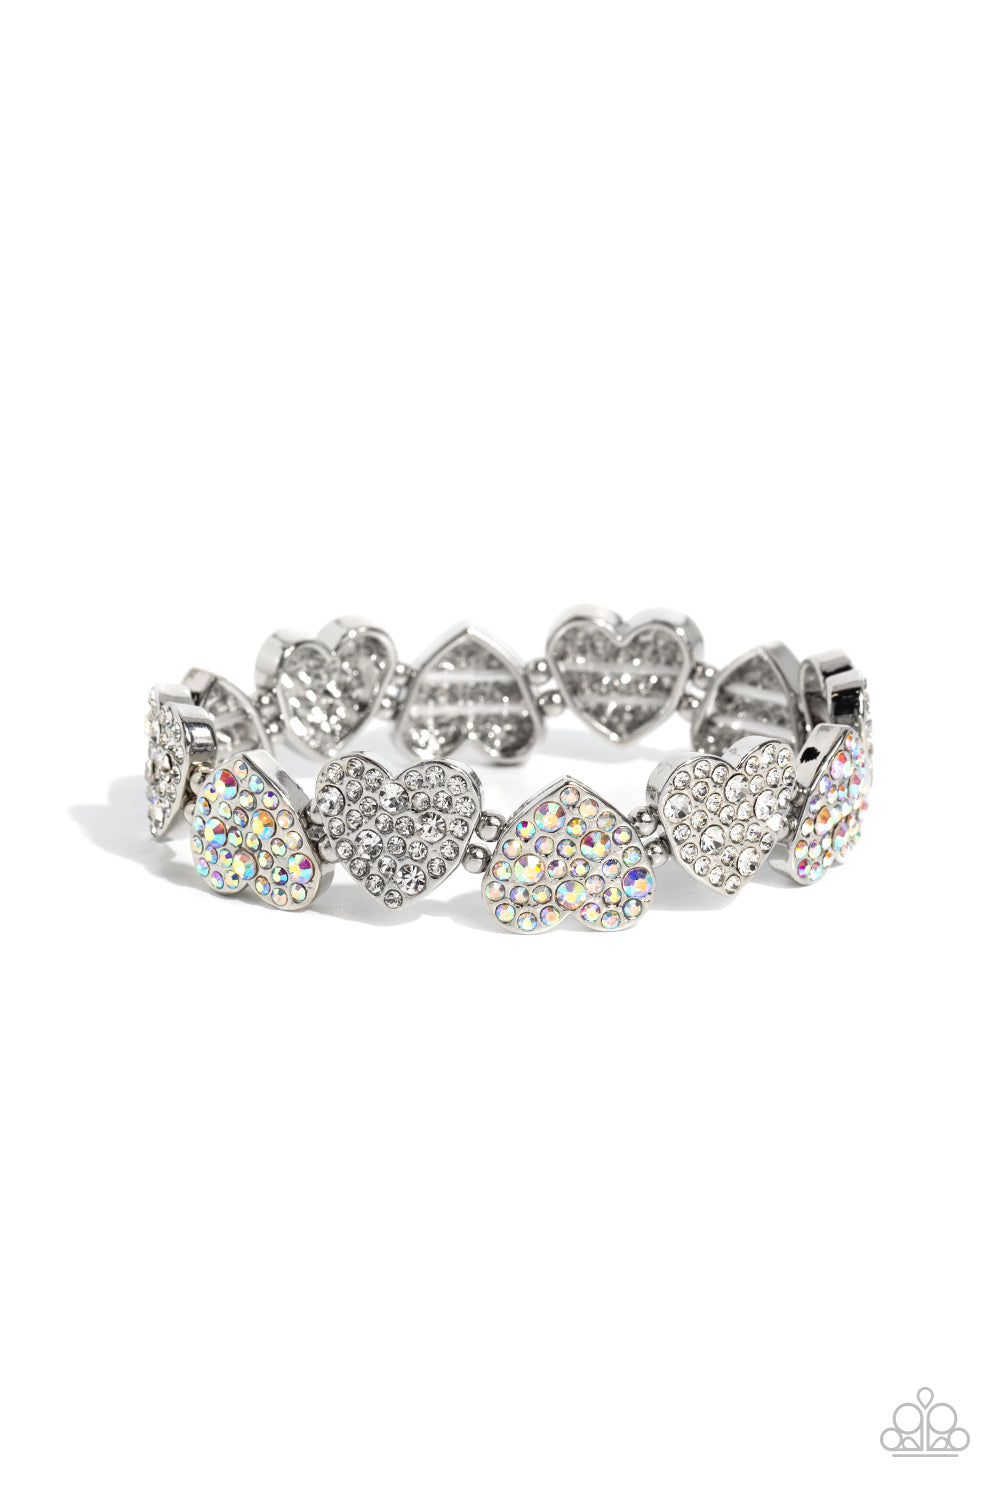 Headliner Heart White Rhinestone Stretch Bracelet - Paparazzi Accessories  Dotted with various sizes of dainty white and iridescent rhinestones, sleek silver hearts alternating in direction link together around the wrist along a stretchy band for a flirtatious finish. Due to its prismatic palette, color may vary.  Sold as one individual bracelet.  SKU: P9RE-WTXX-581XX